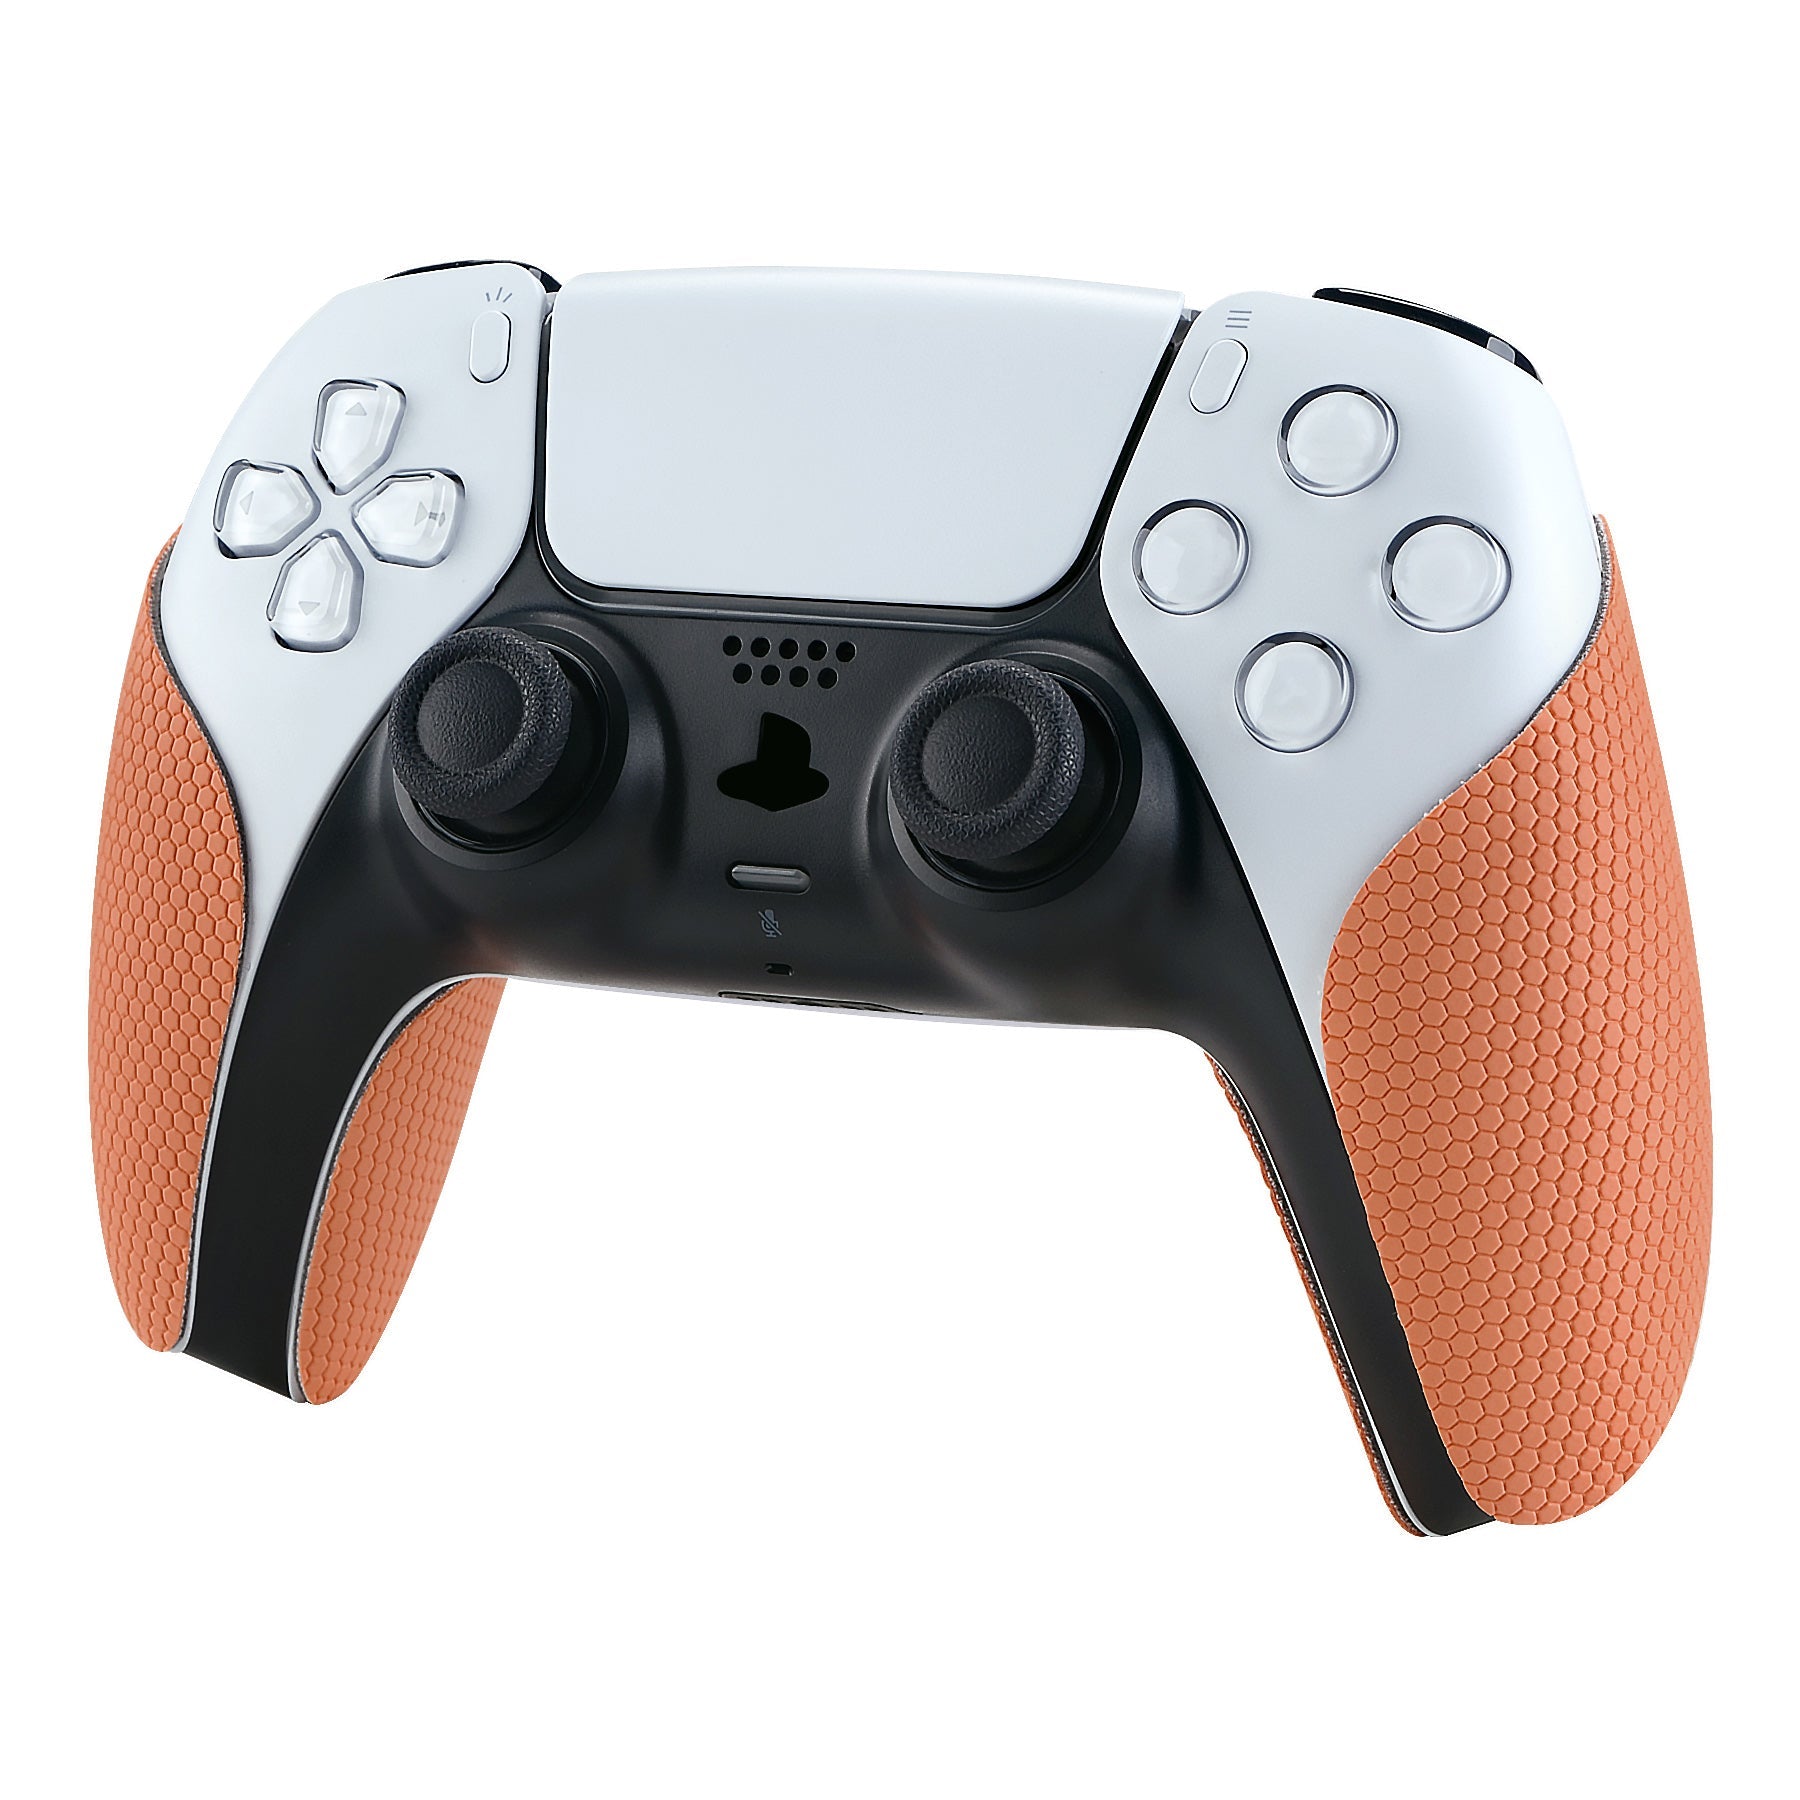 PlayVital Coral Anti-Skid Sweat-Absorbent Controller Grip for PlayStation 5 Controller, Professional Textured Soft Rubber Pads Handle Grips for PS5 Controller - PFPJ024 PlayVital